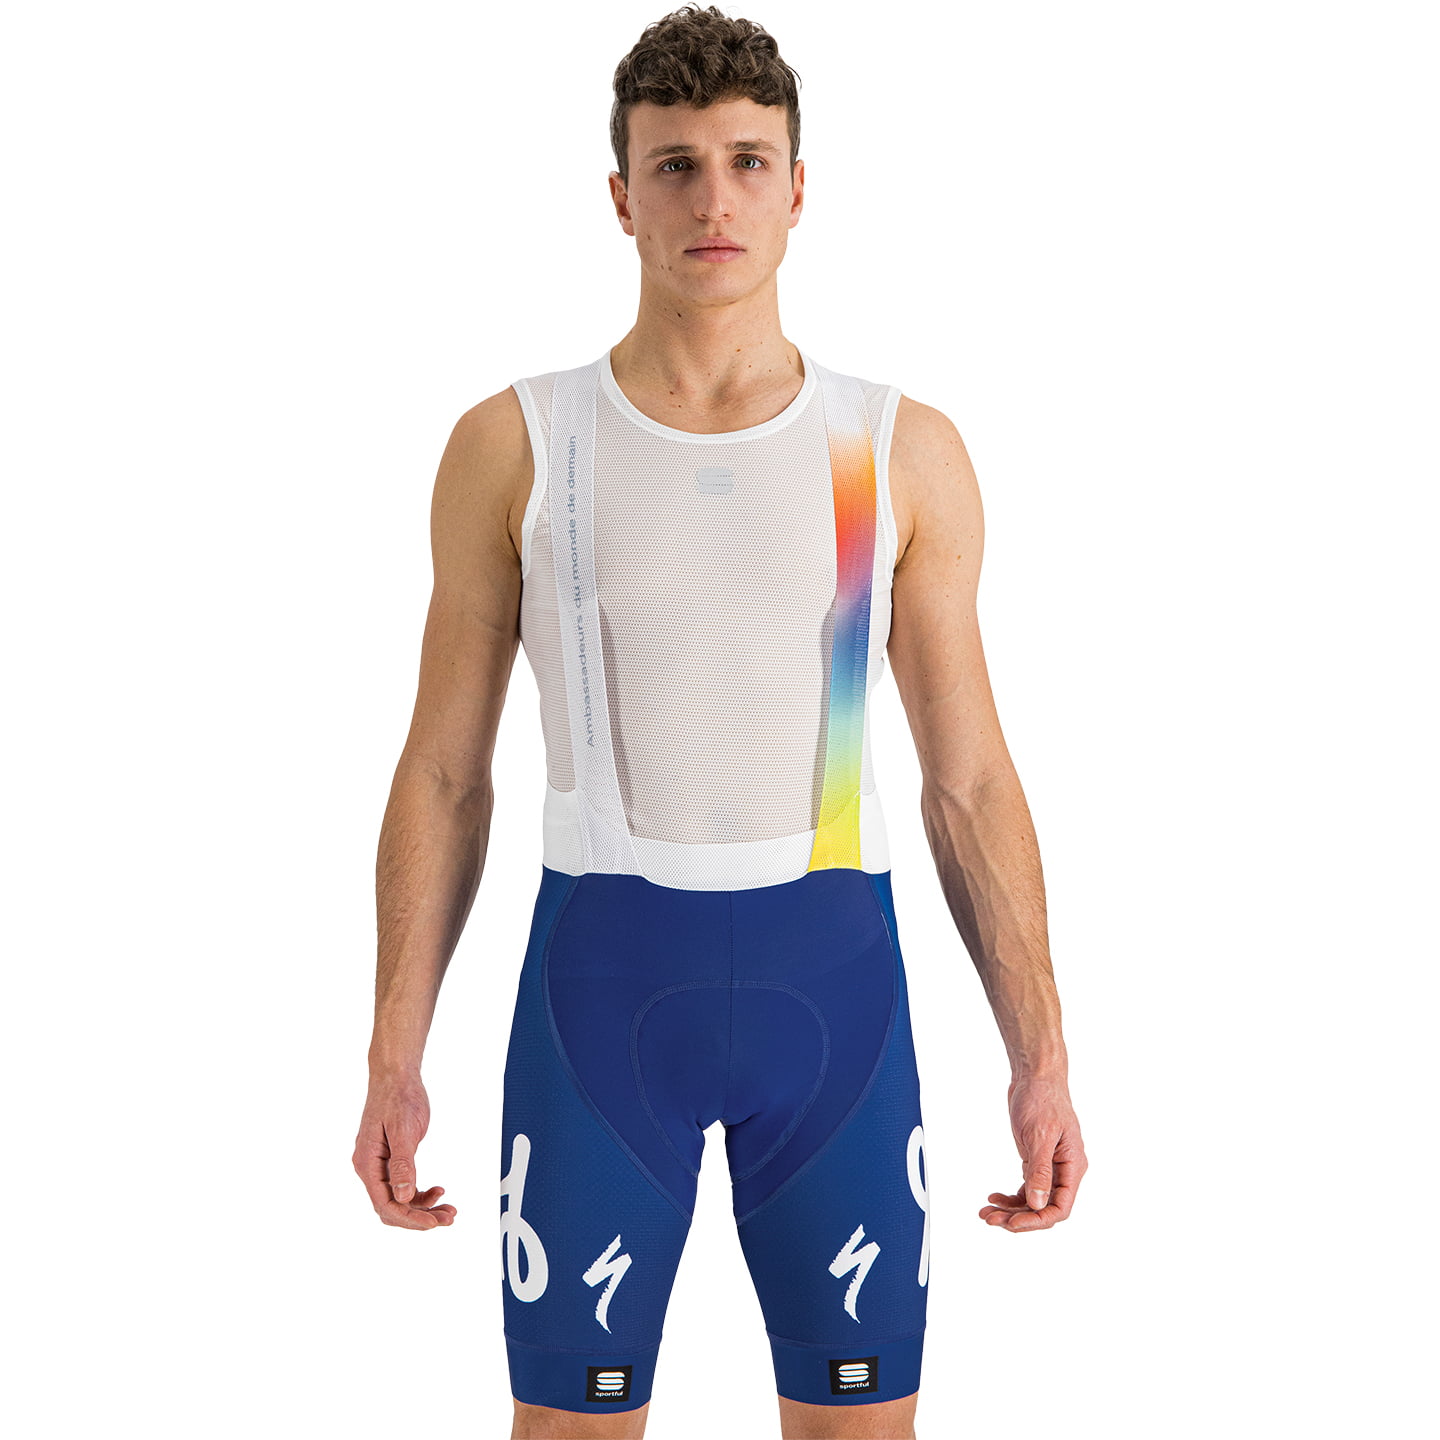 TEAM TOTALENERGIES Pro Race 2023 Bib Shorts, for men, size 2XL, Cycle trousers, Cycle gear